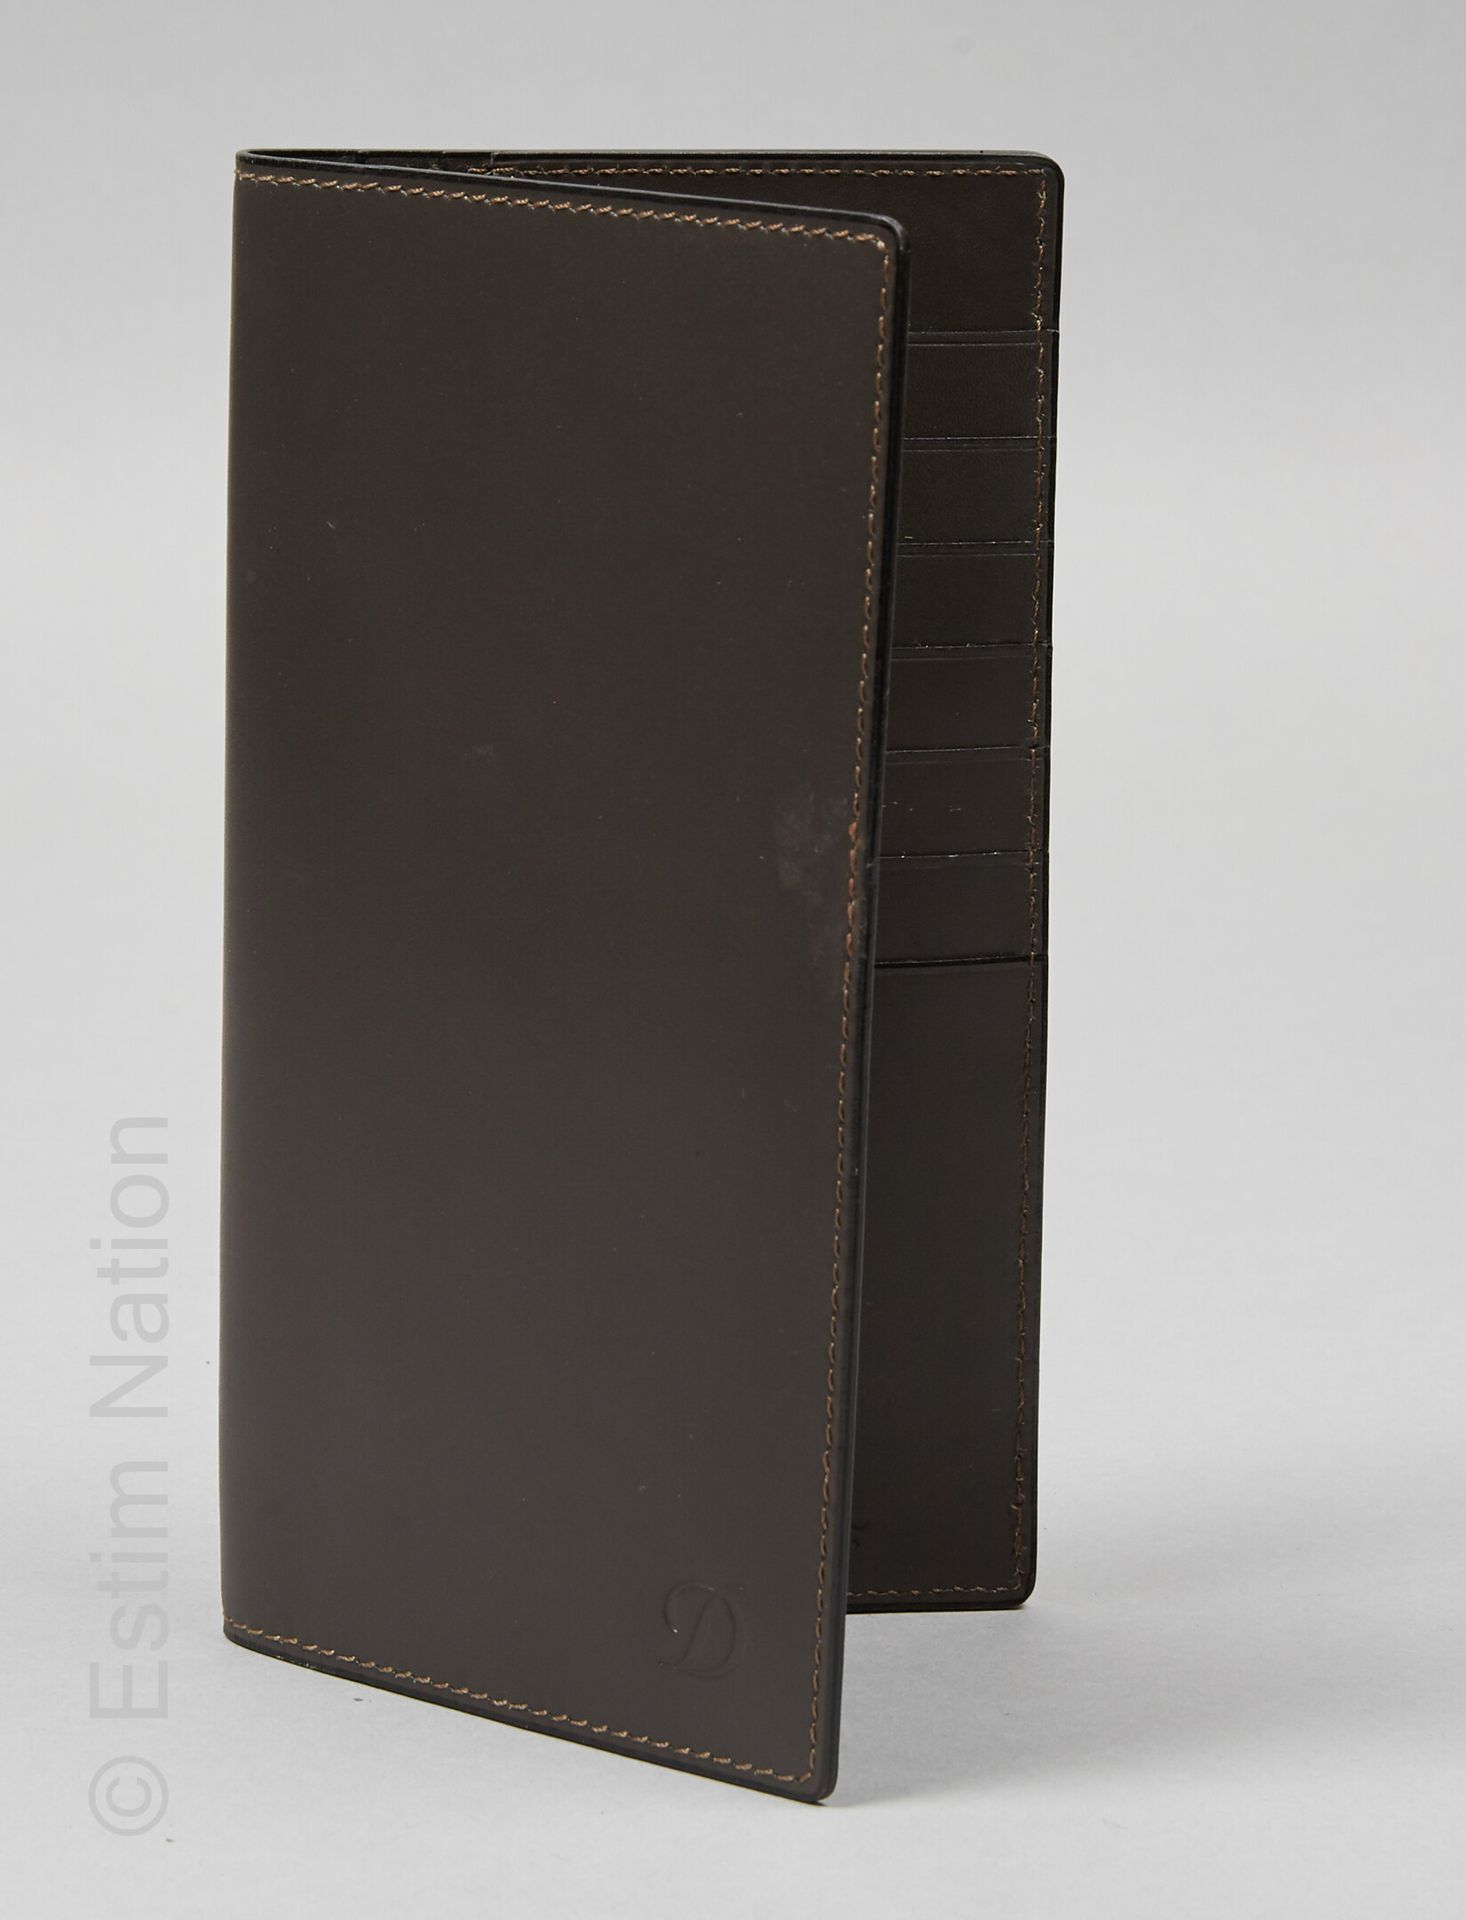 ST DUPONT Grey leather wallet (18 x 10 cm closed) (scratches, minor soiling)